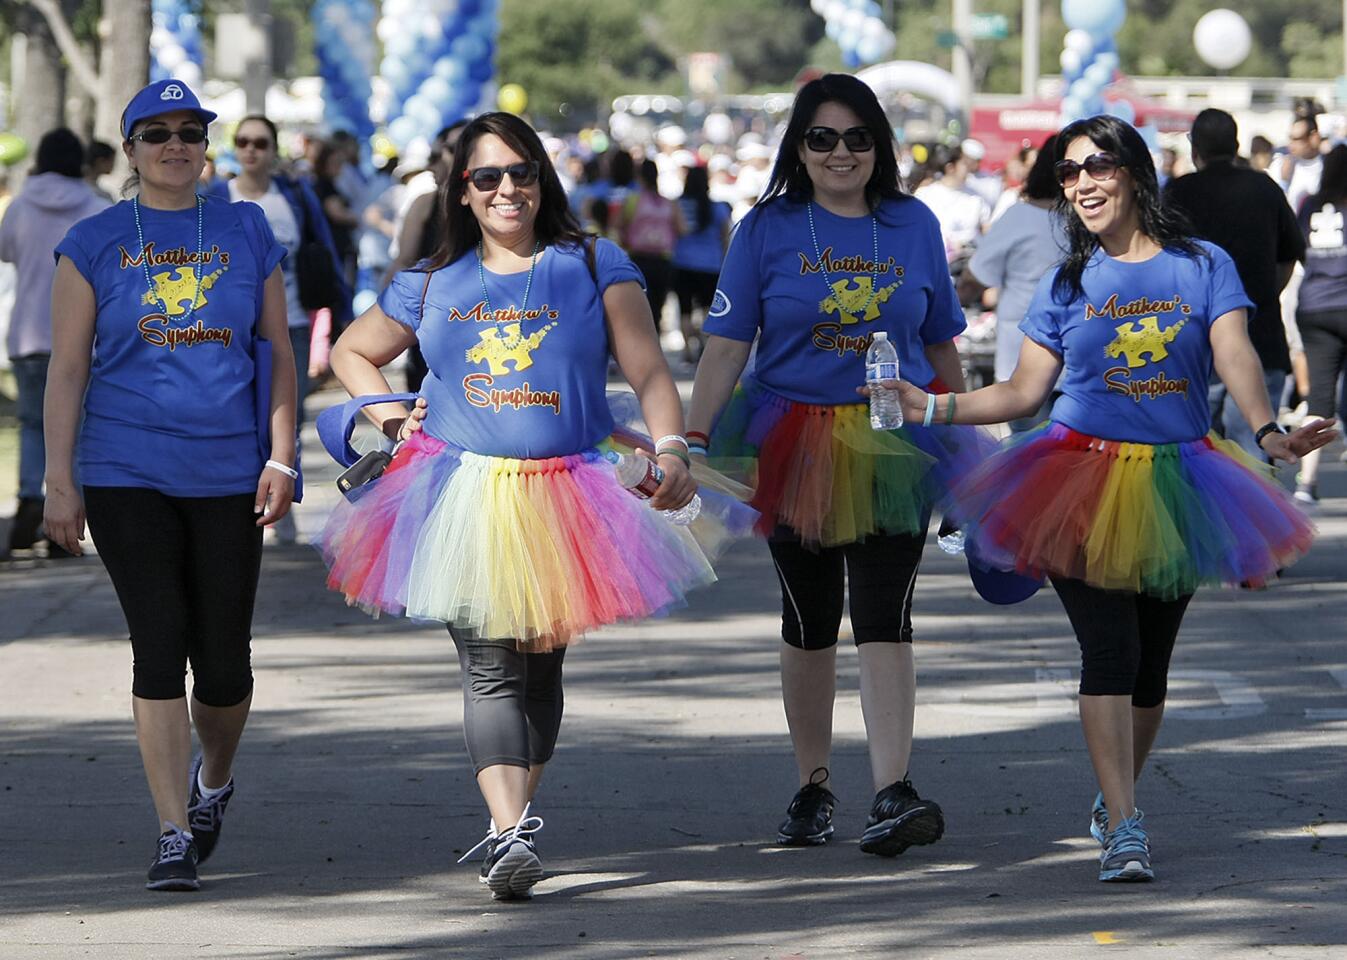 Photo Gallery: 11th Annual Walk Now For Autism Speaks around the Rose Bowl